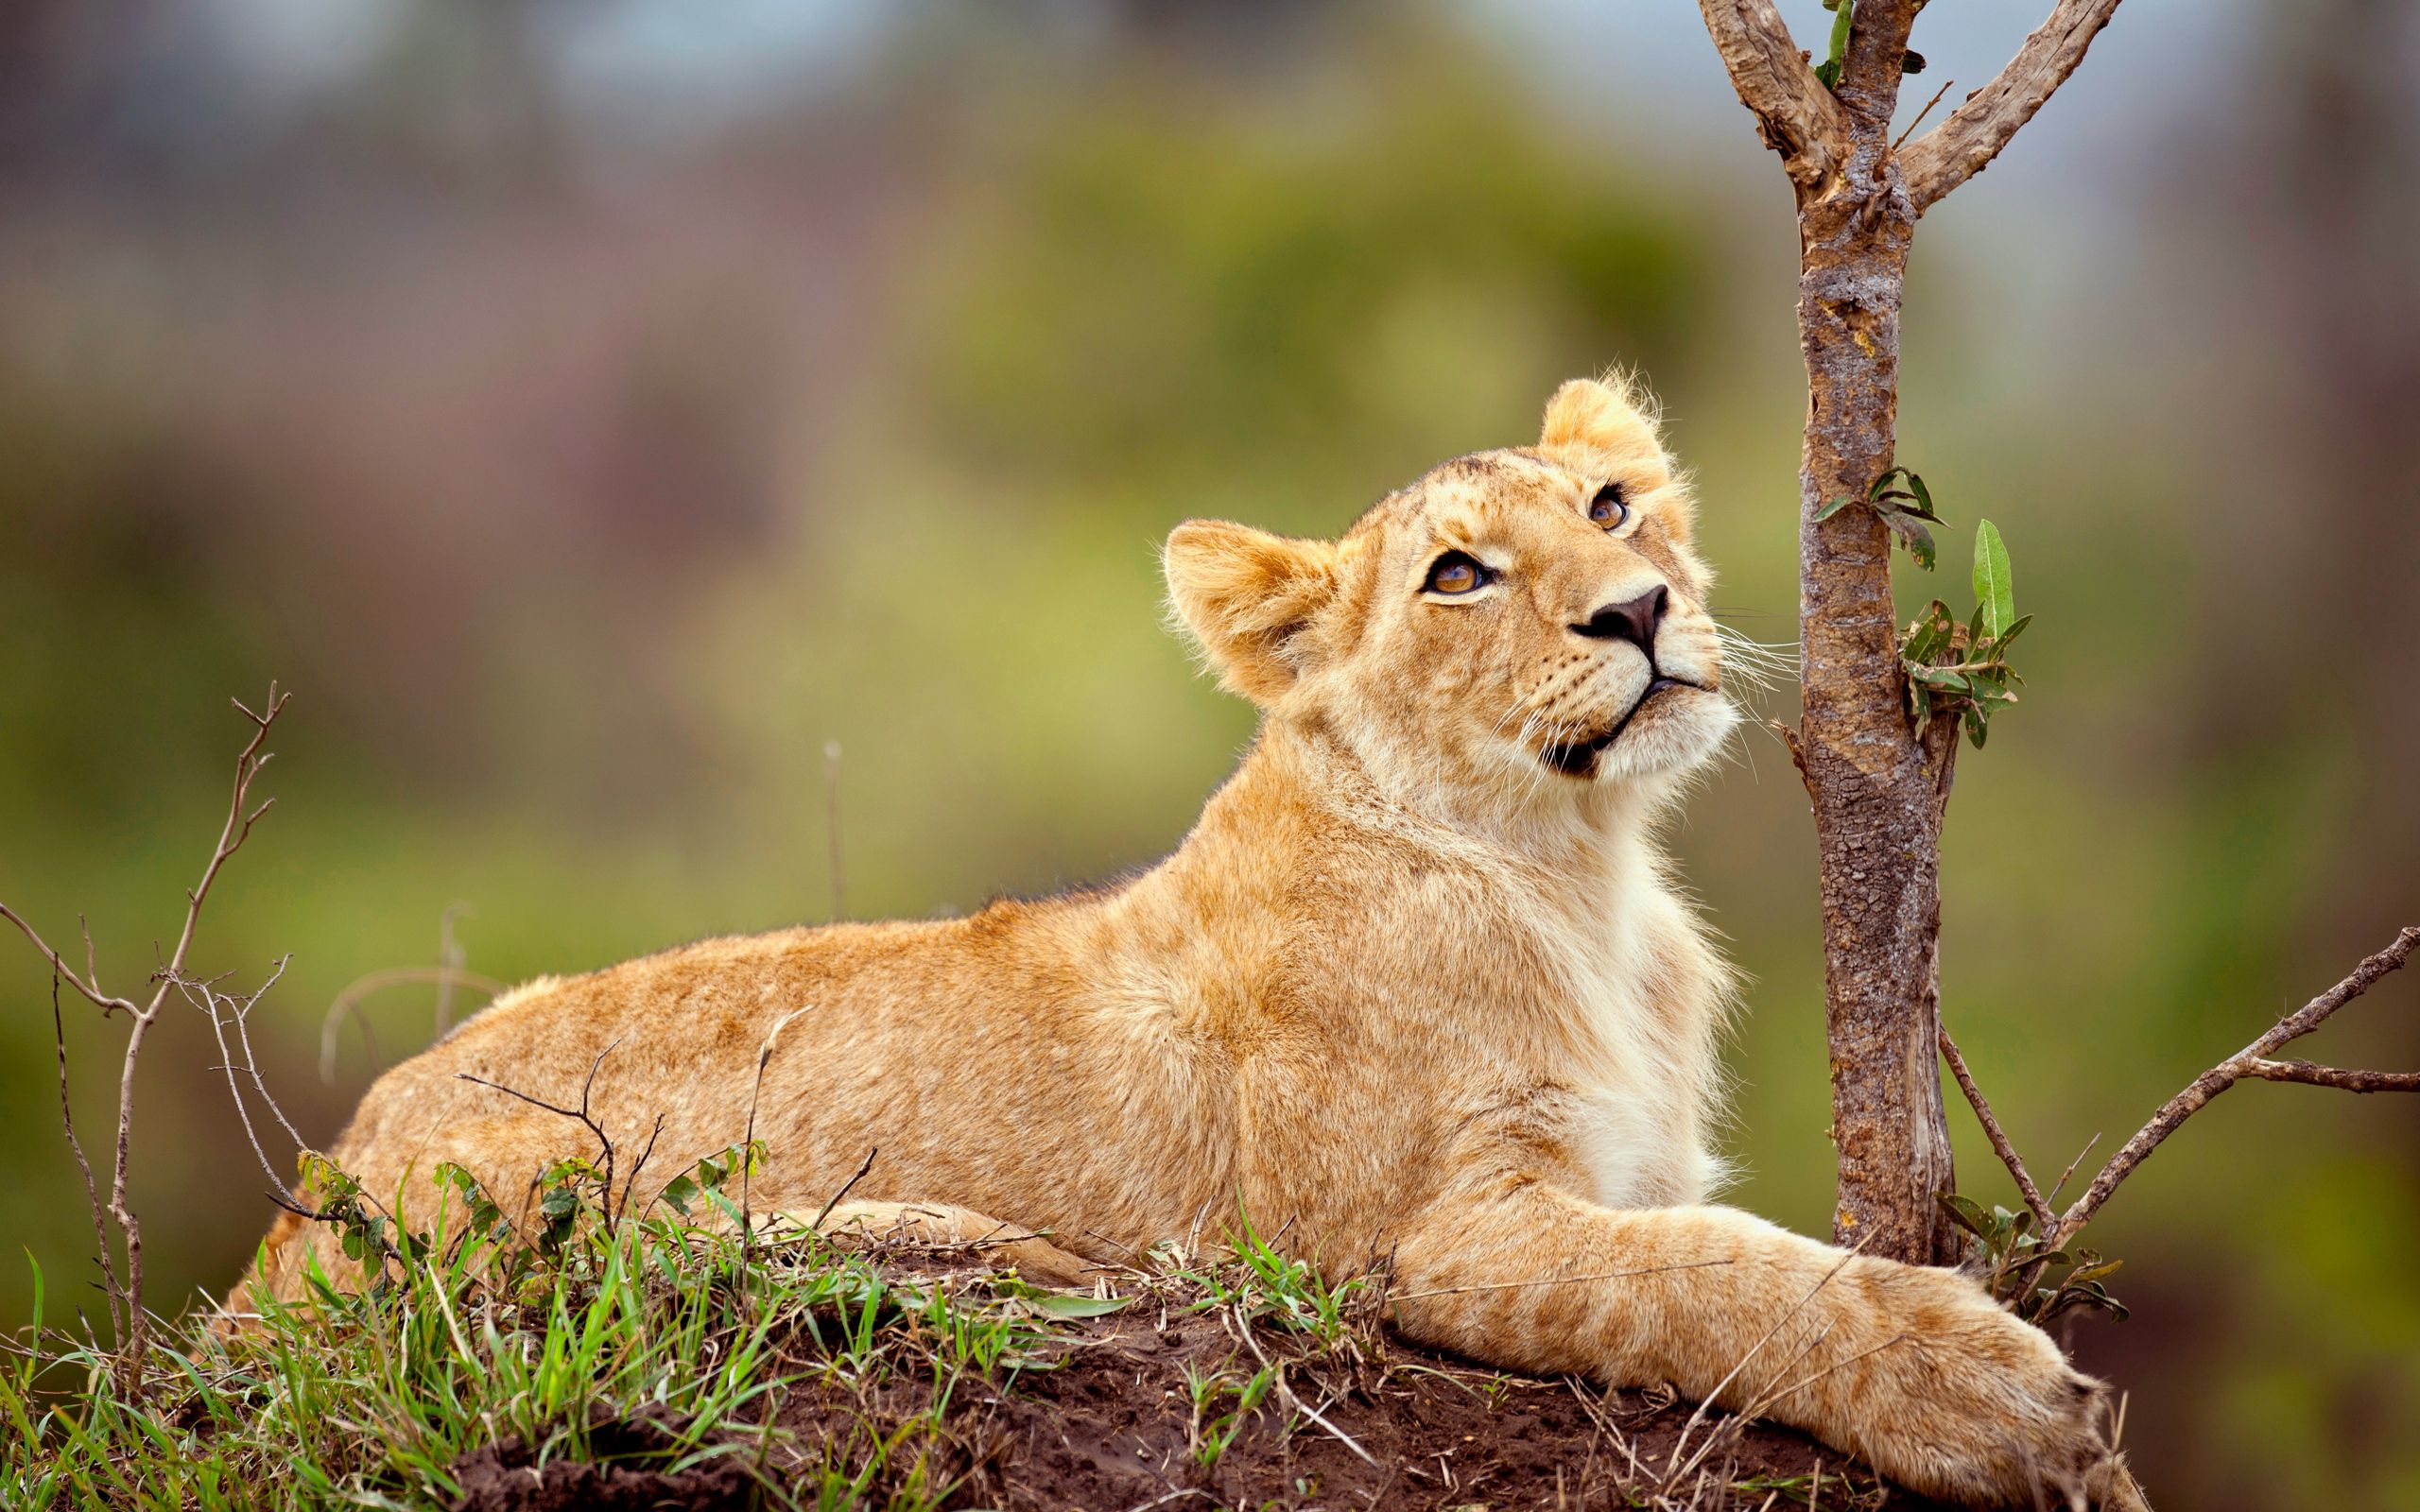 joey, animals, grass, young, to lie down, lie, branch, lion, lion cub iphone wallpaper